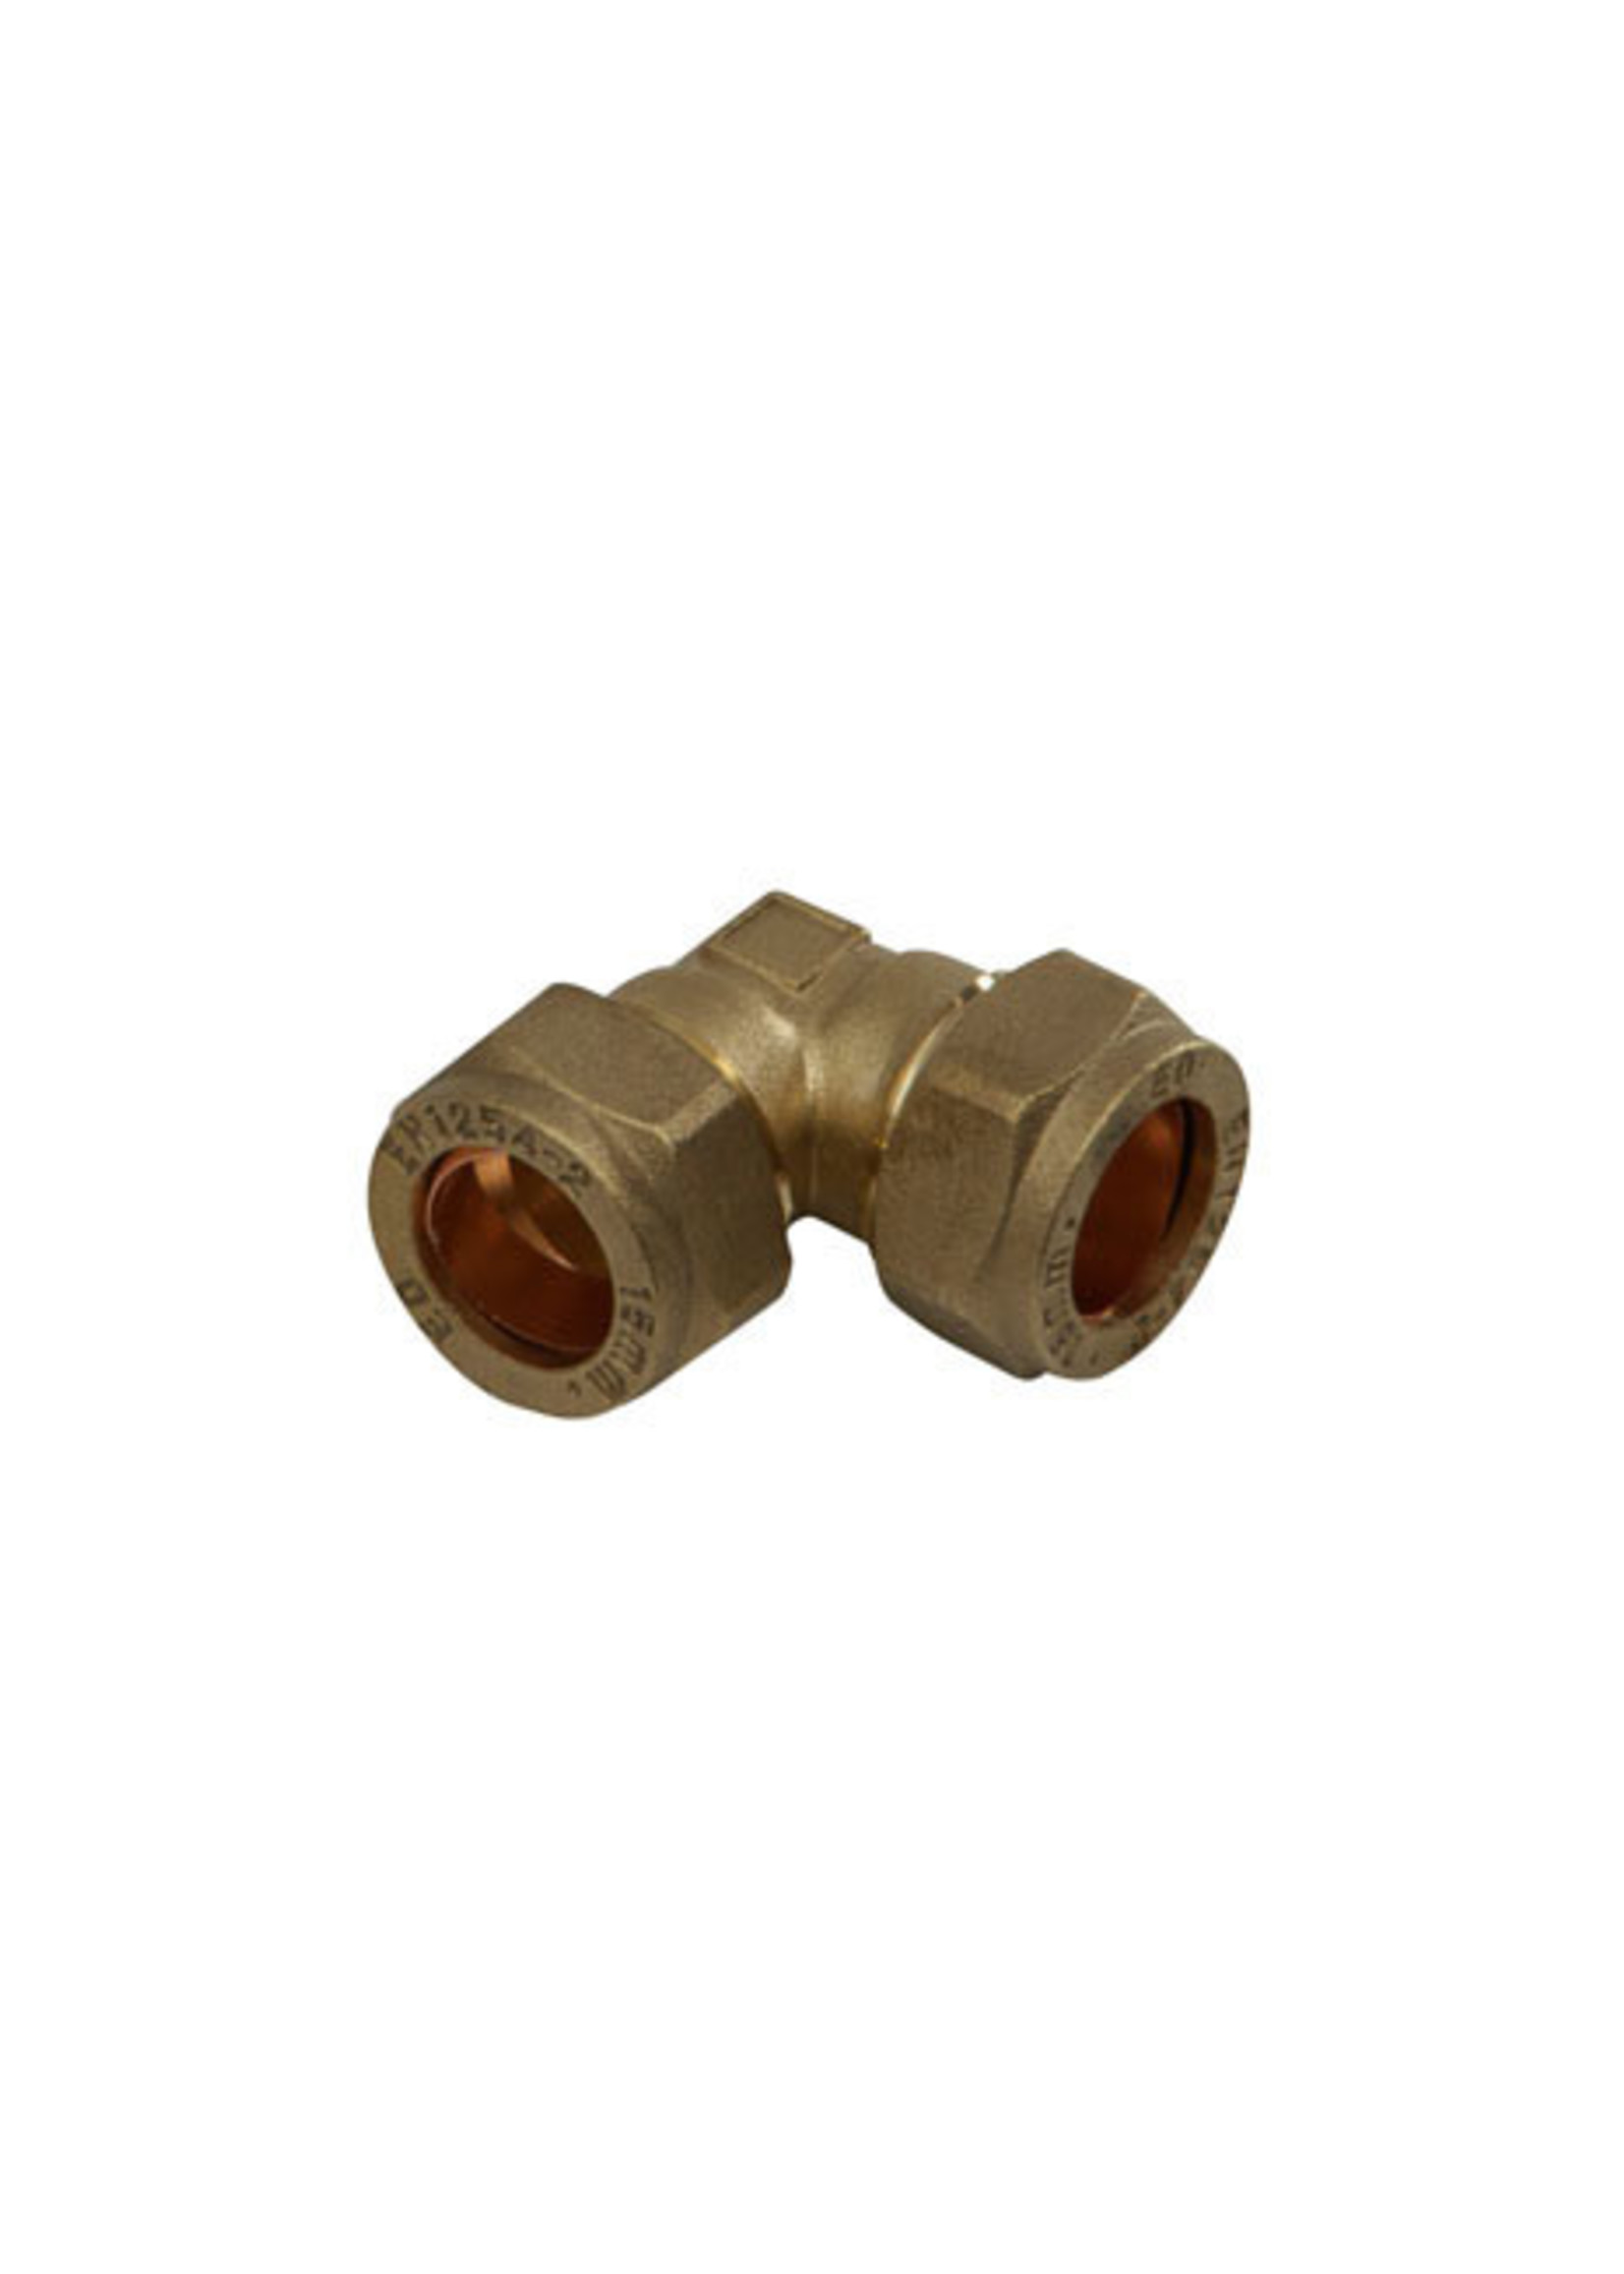 Securplumb WRAS Compression Elbow 22mm Brass